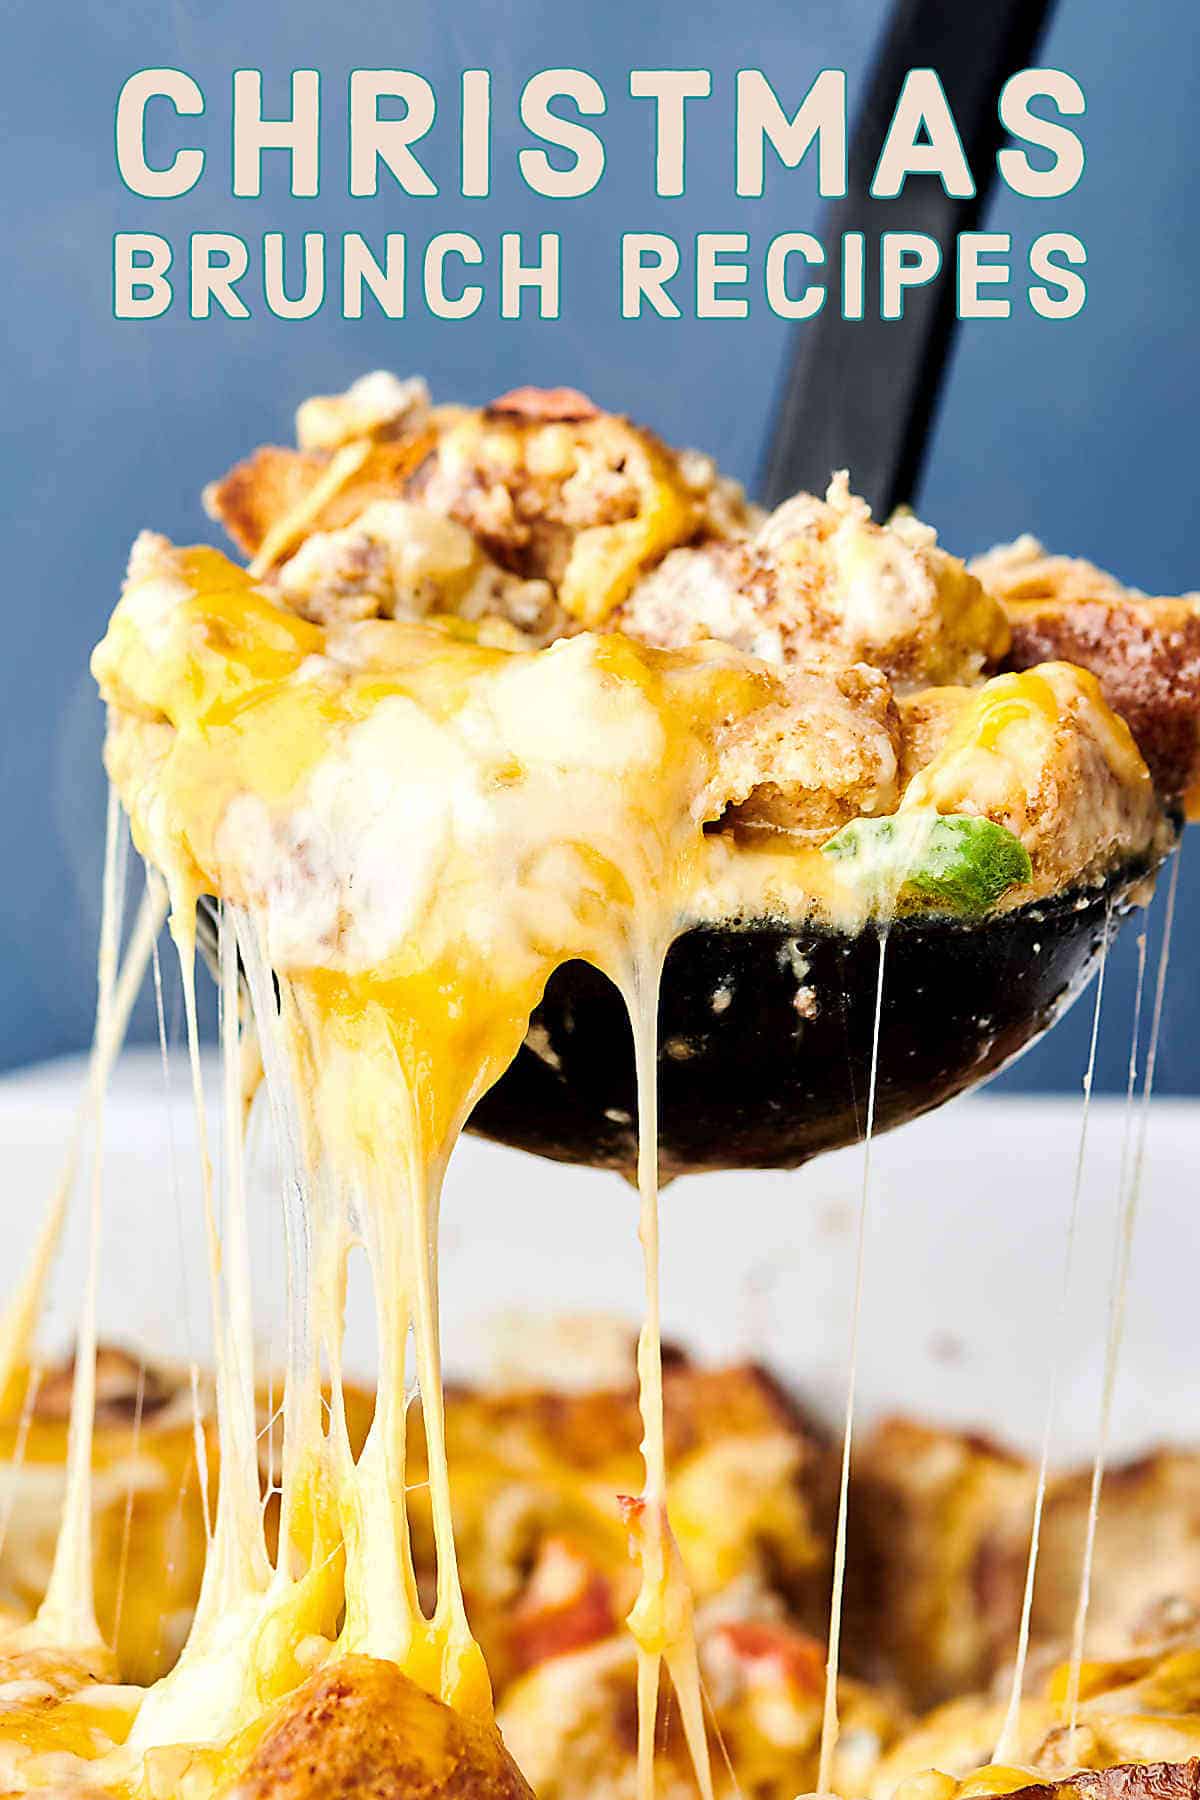 10 Easy Christmas Brunch Recipes - Show Me the Yummy